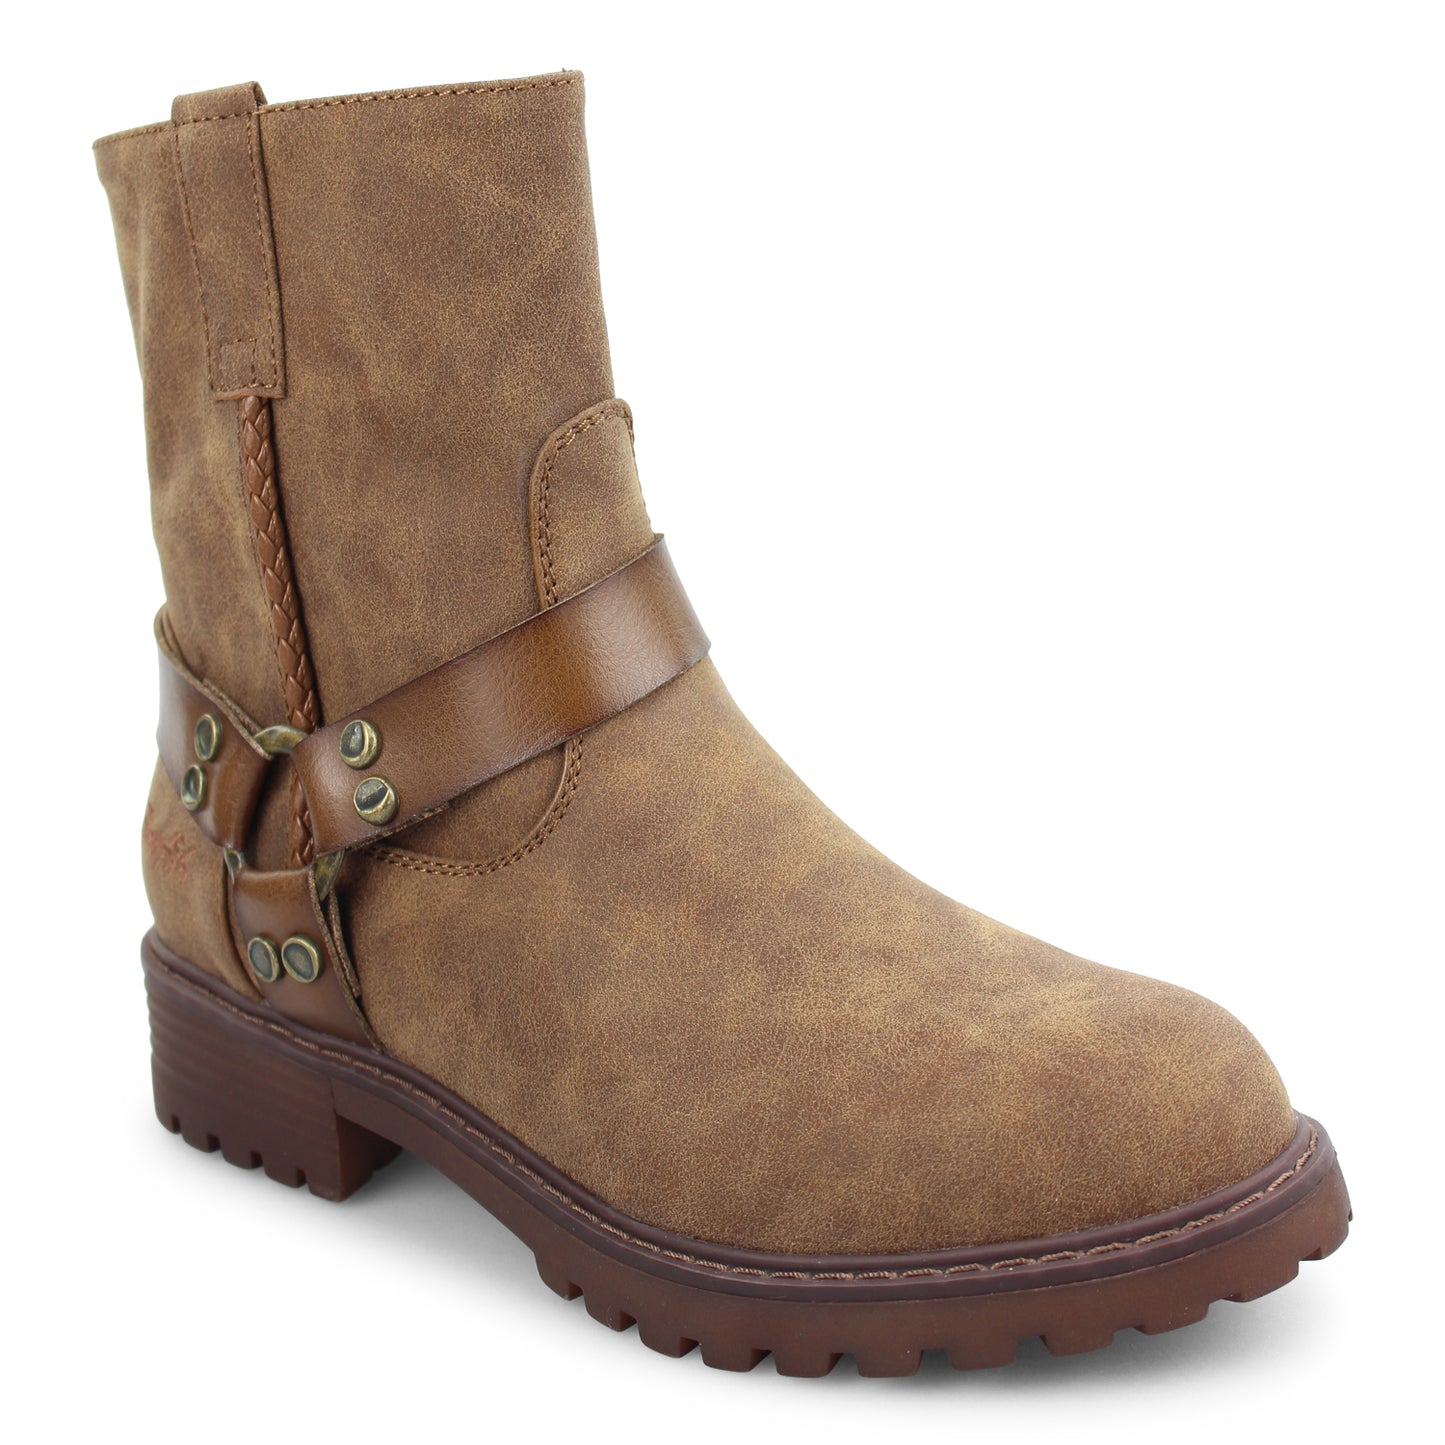 Roonie 4 Earth Boots - Brown Bear